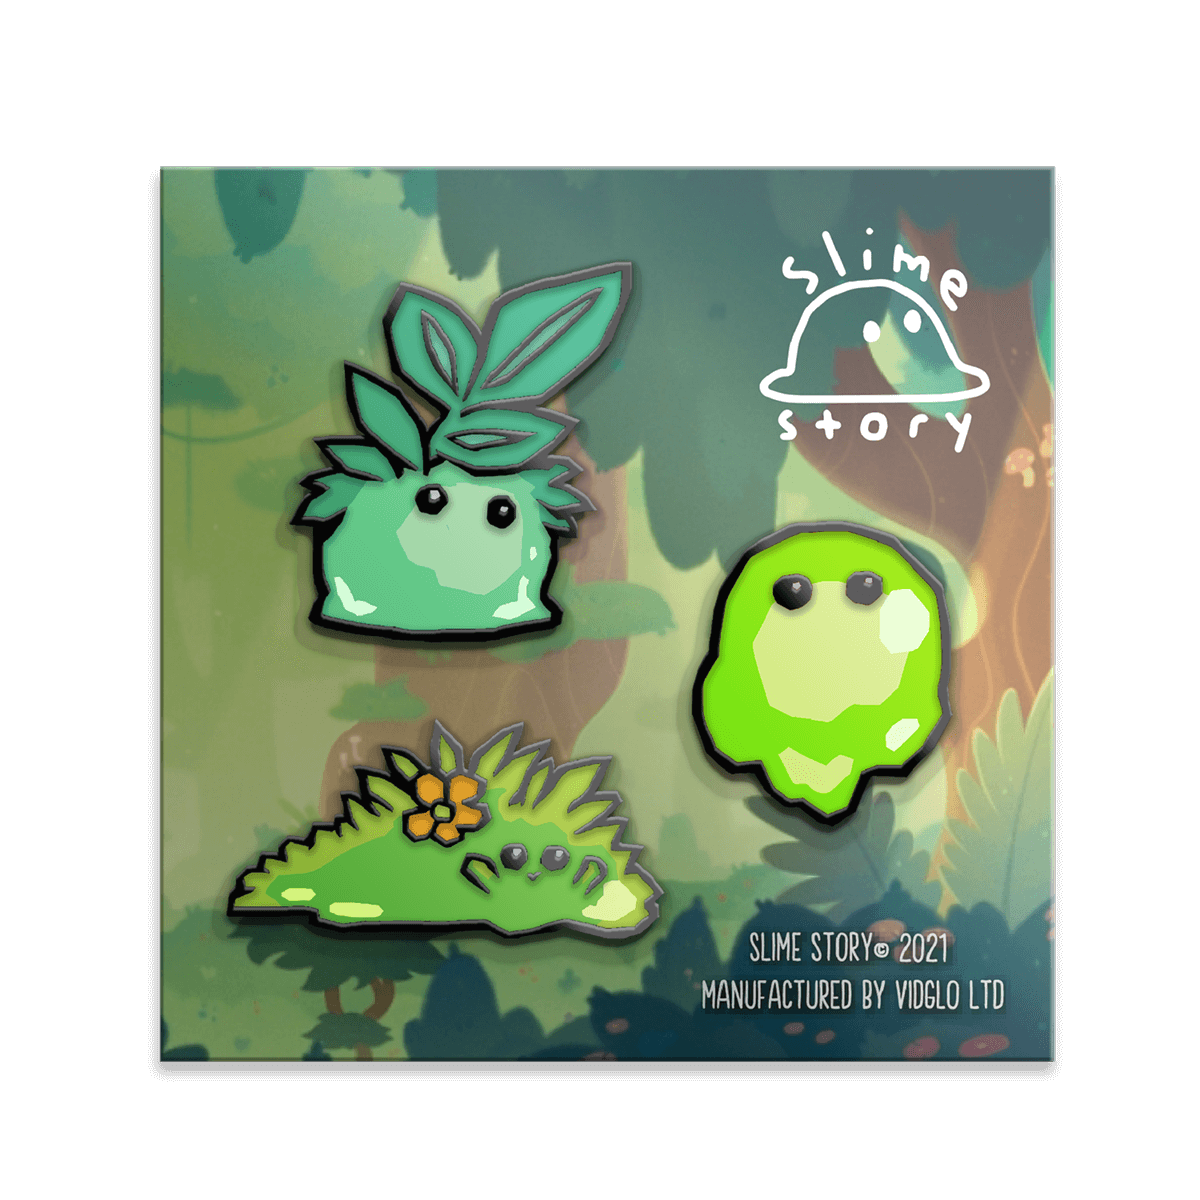 Forest Pin Set 2